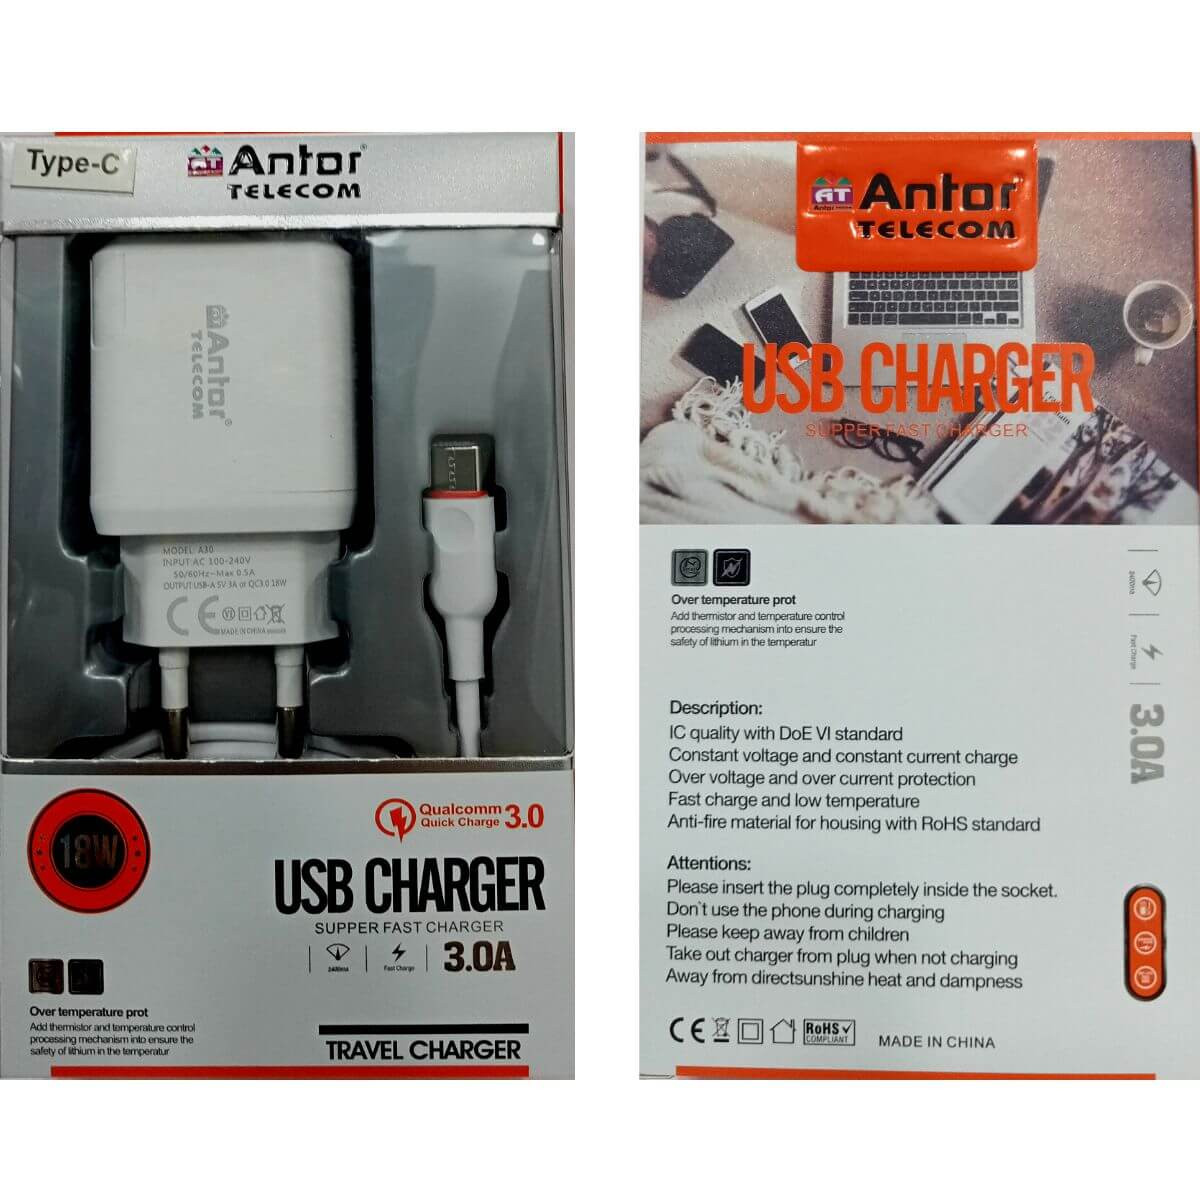 Antor 18Watt 3.0A QC Type-C Cable USB Fast Charger BD